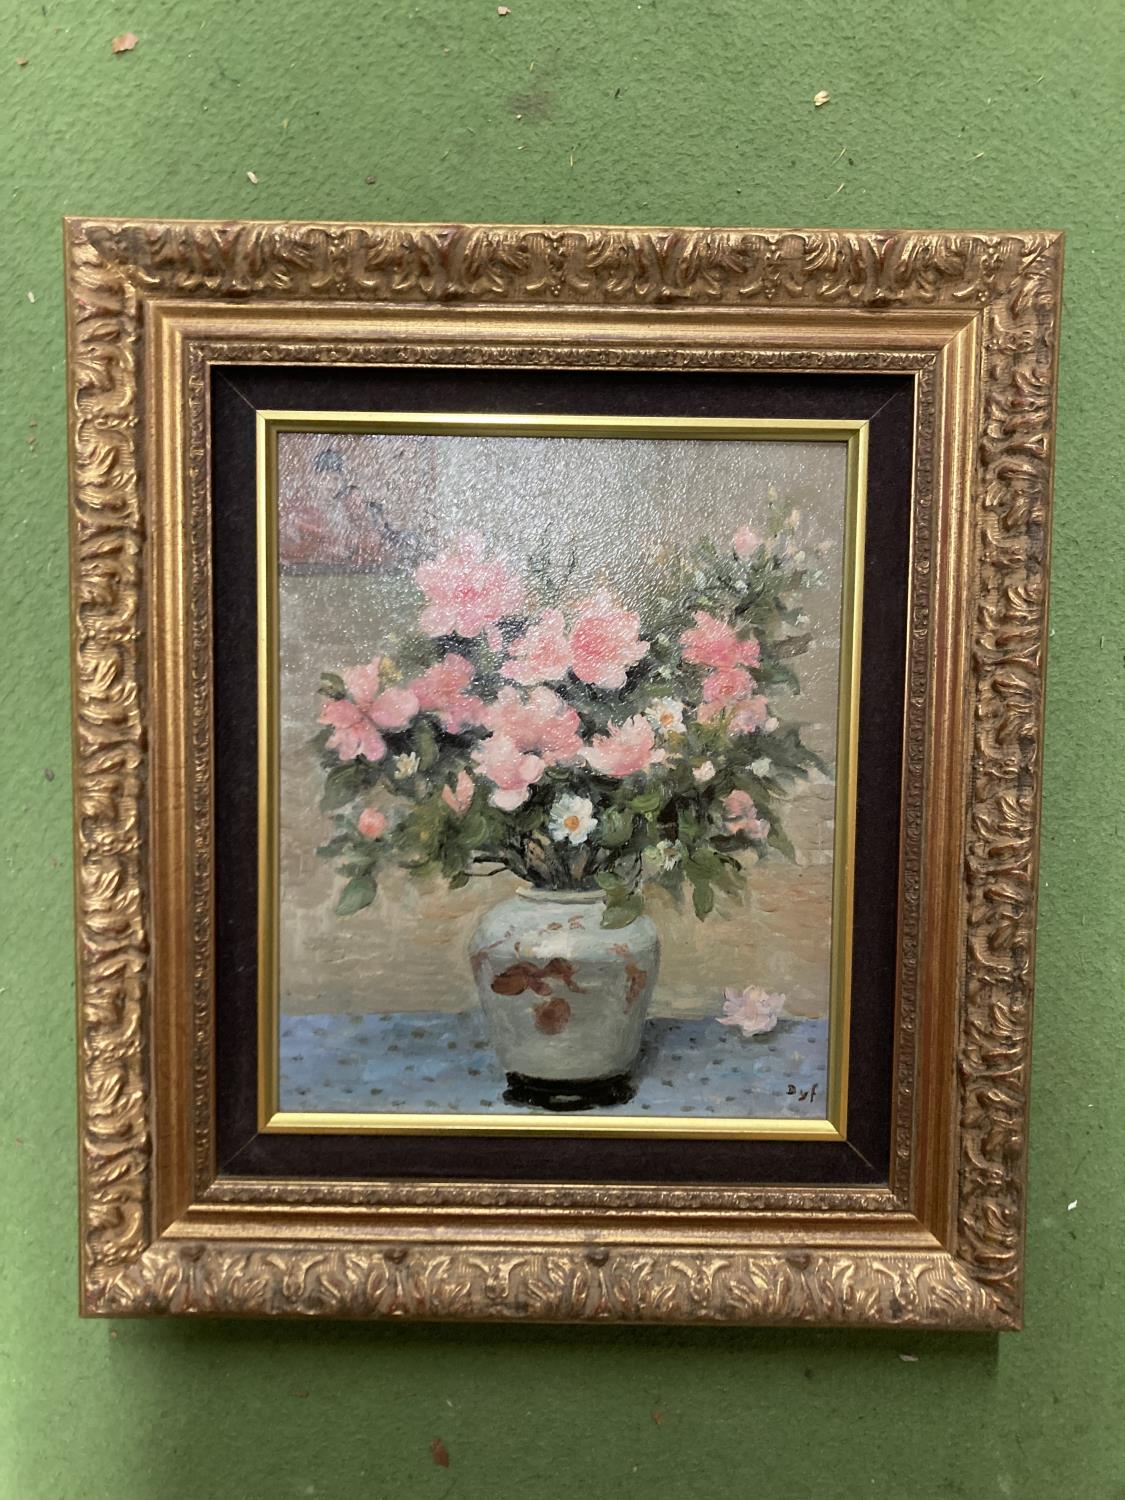 AN OIL ON BOARD STILL LIFE PAINTING OF FLOWERS